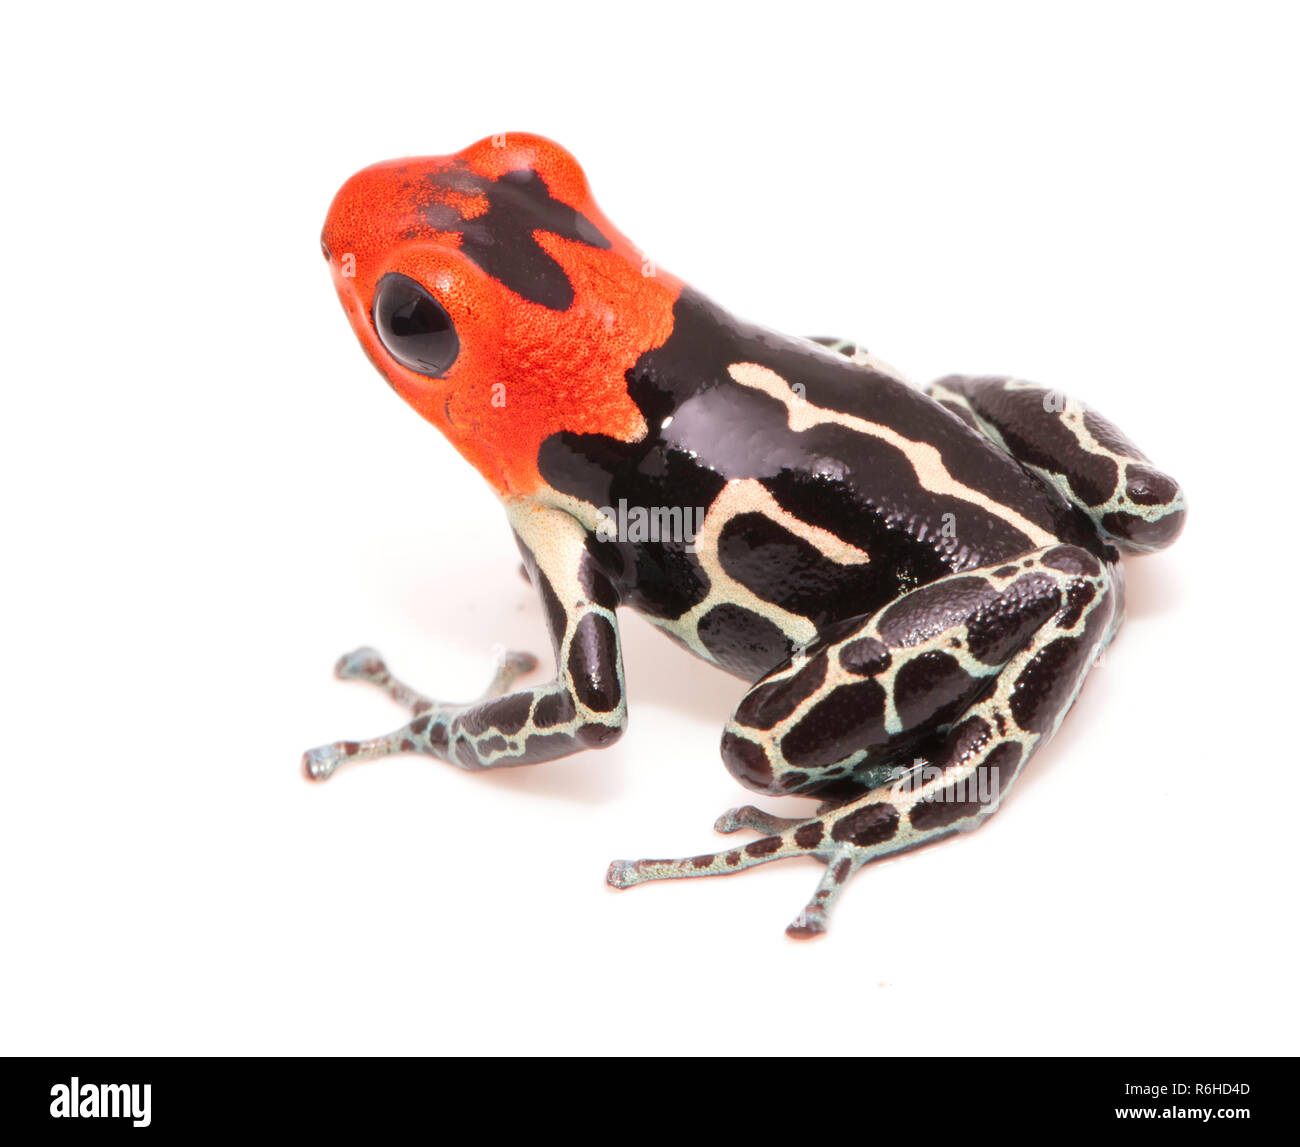 Red headed poison dart or arrow frog, Ranitomeya fantastica. A beautiful small poisonous animal from the Amazon rain forest in Peru. Isolated on white Stock Photo